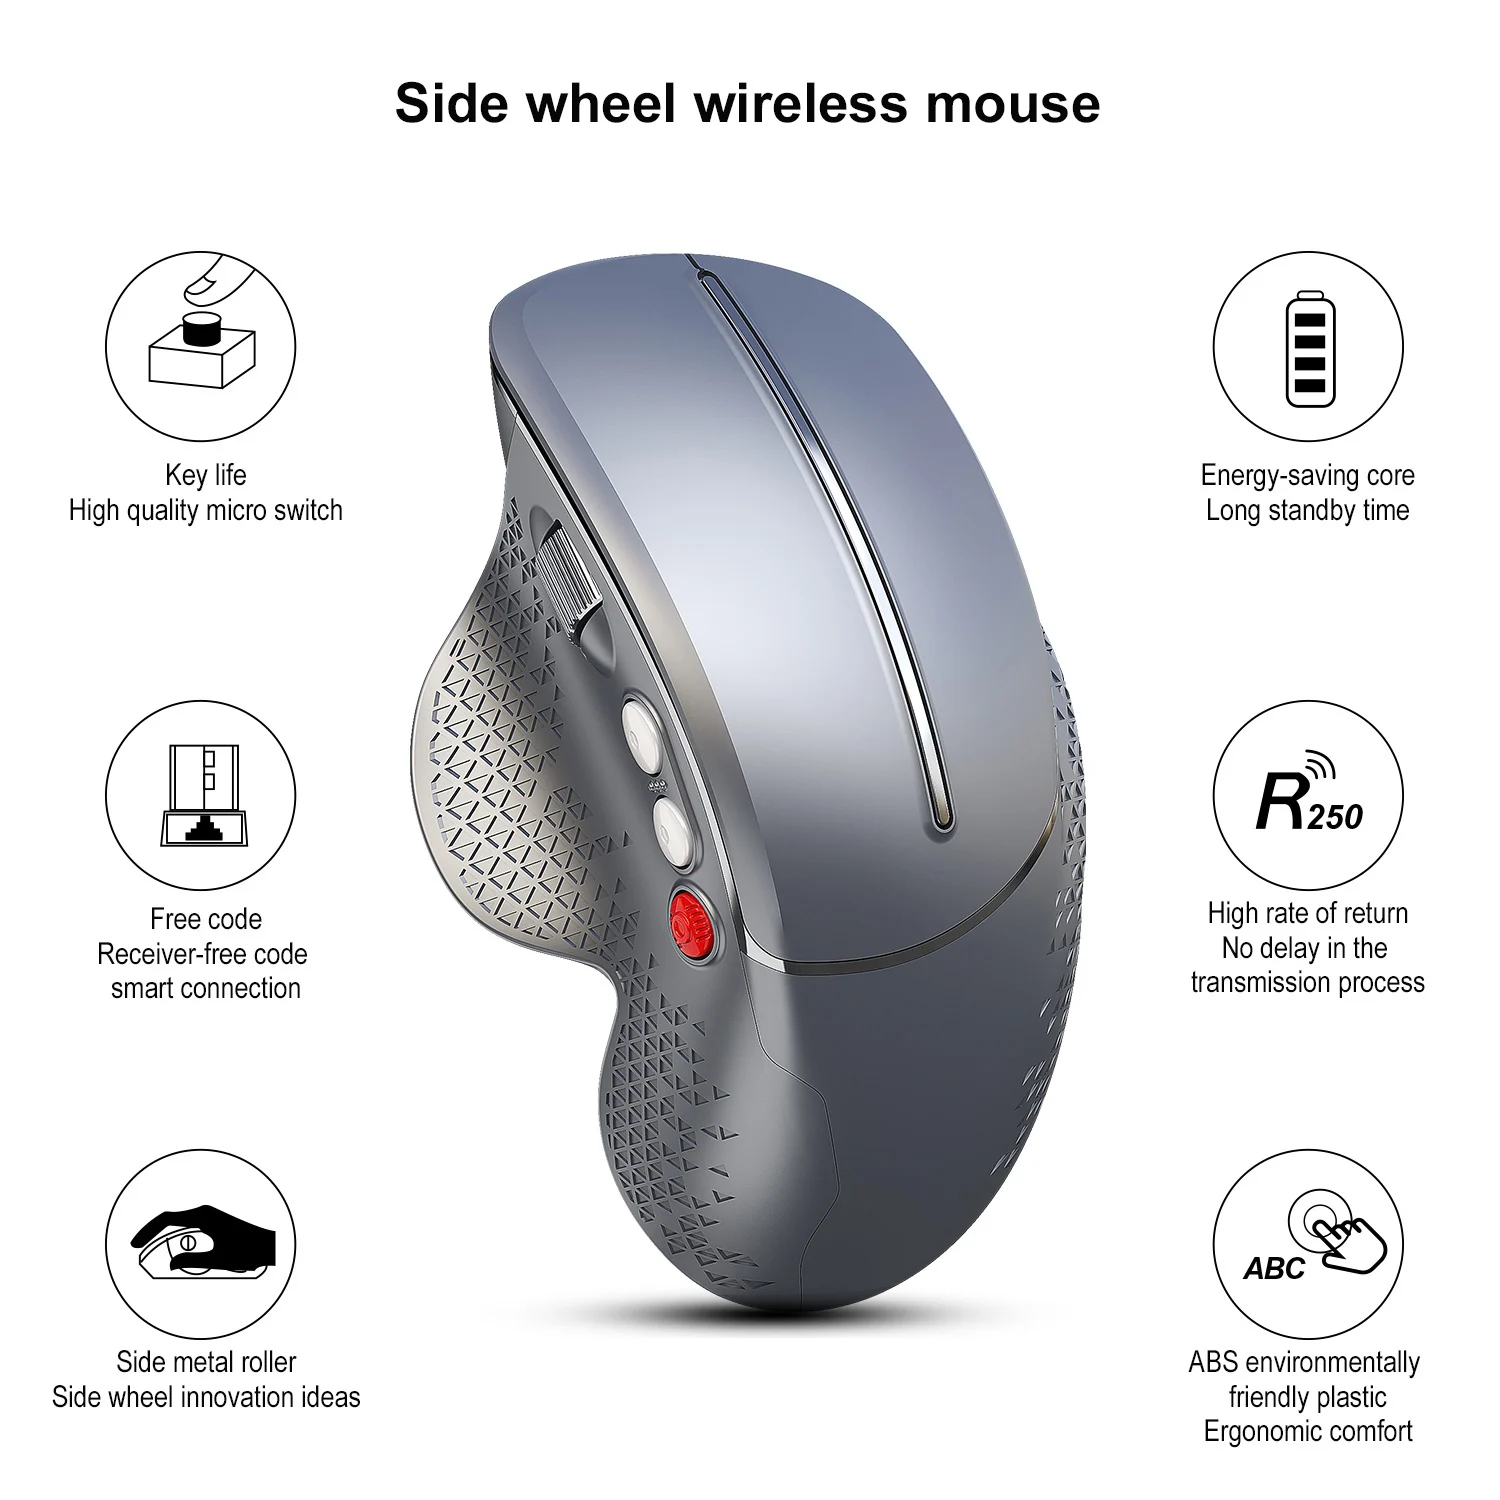 hxsj t32 vertical mouse 2 4ghz wireless office mouse abs material 6d laptop mice computer mouse pmw3212 3600dpi adjustable free global shipping